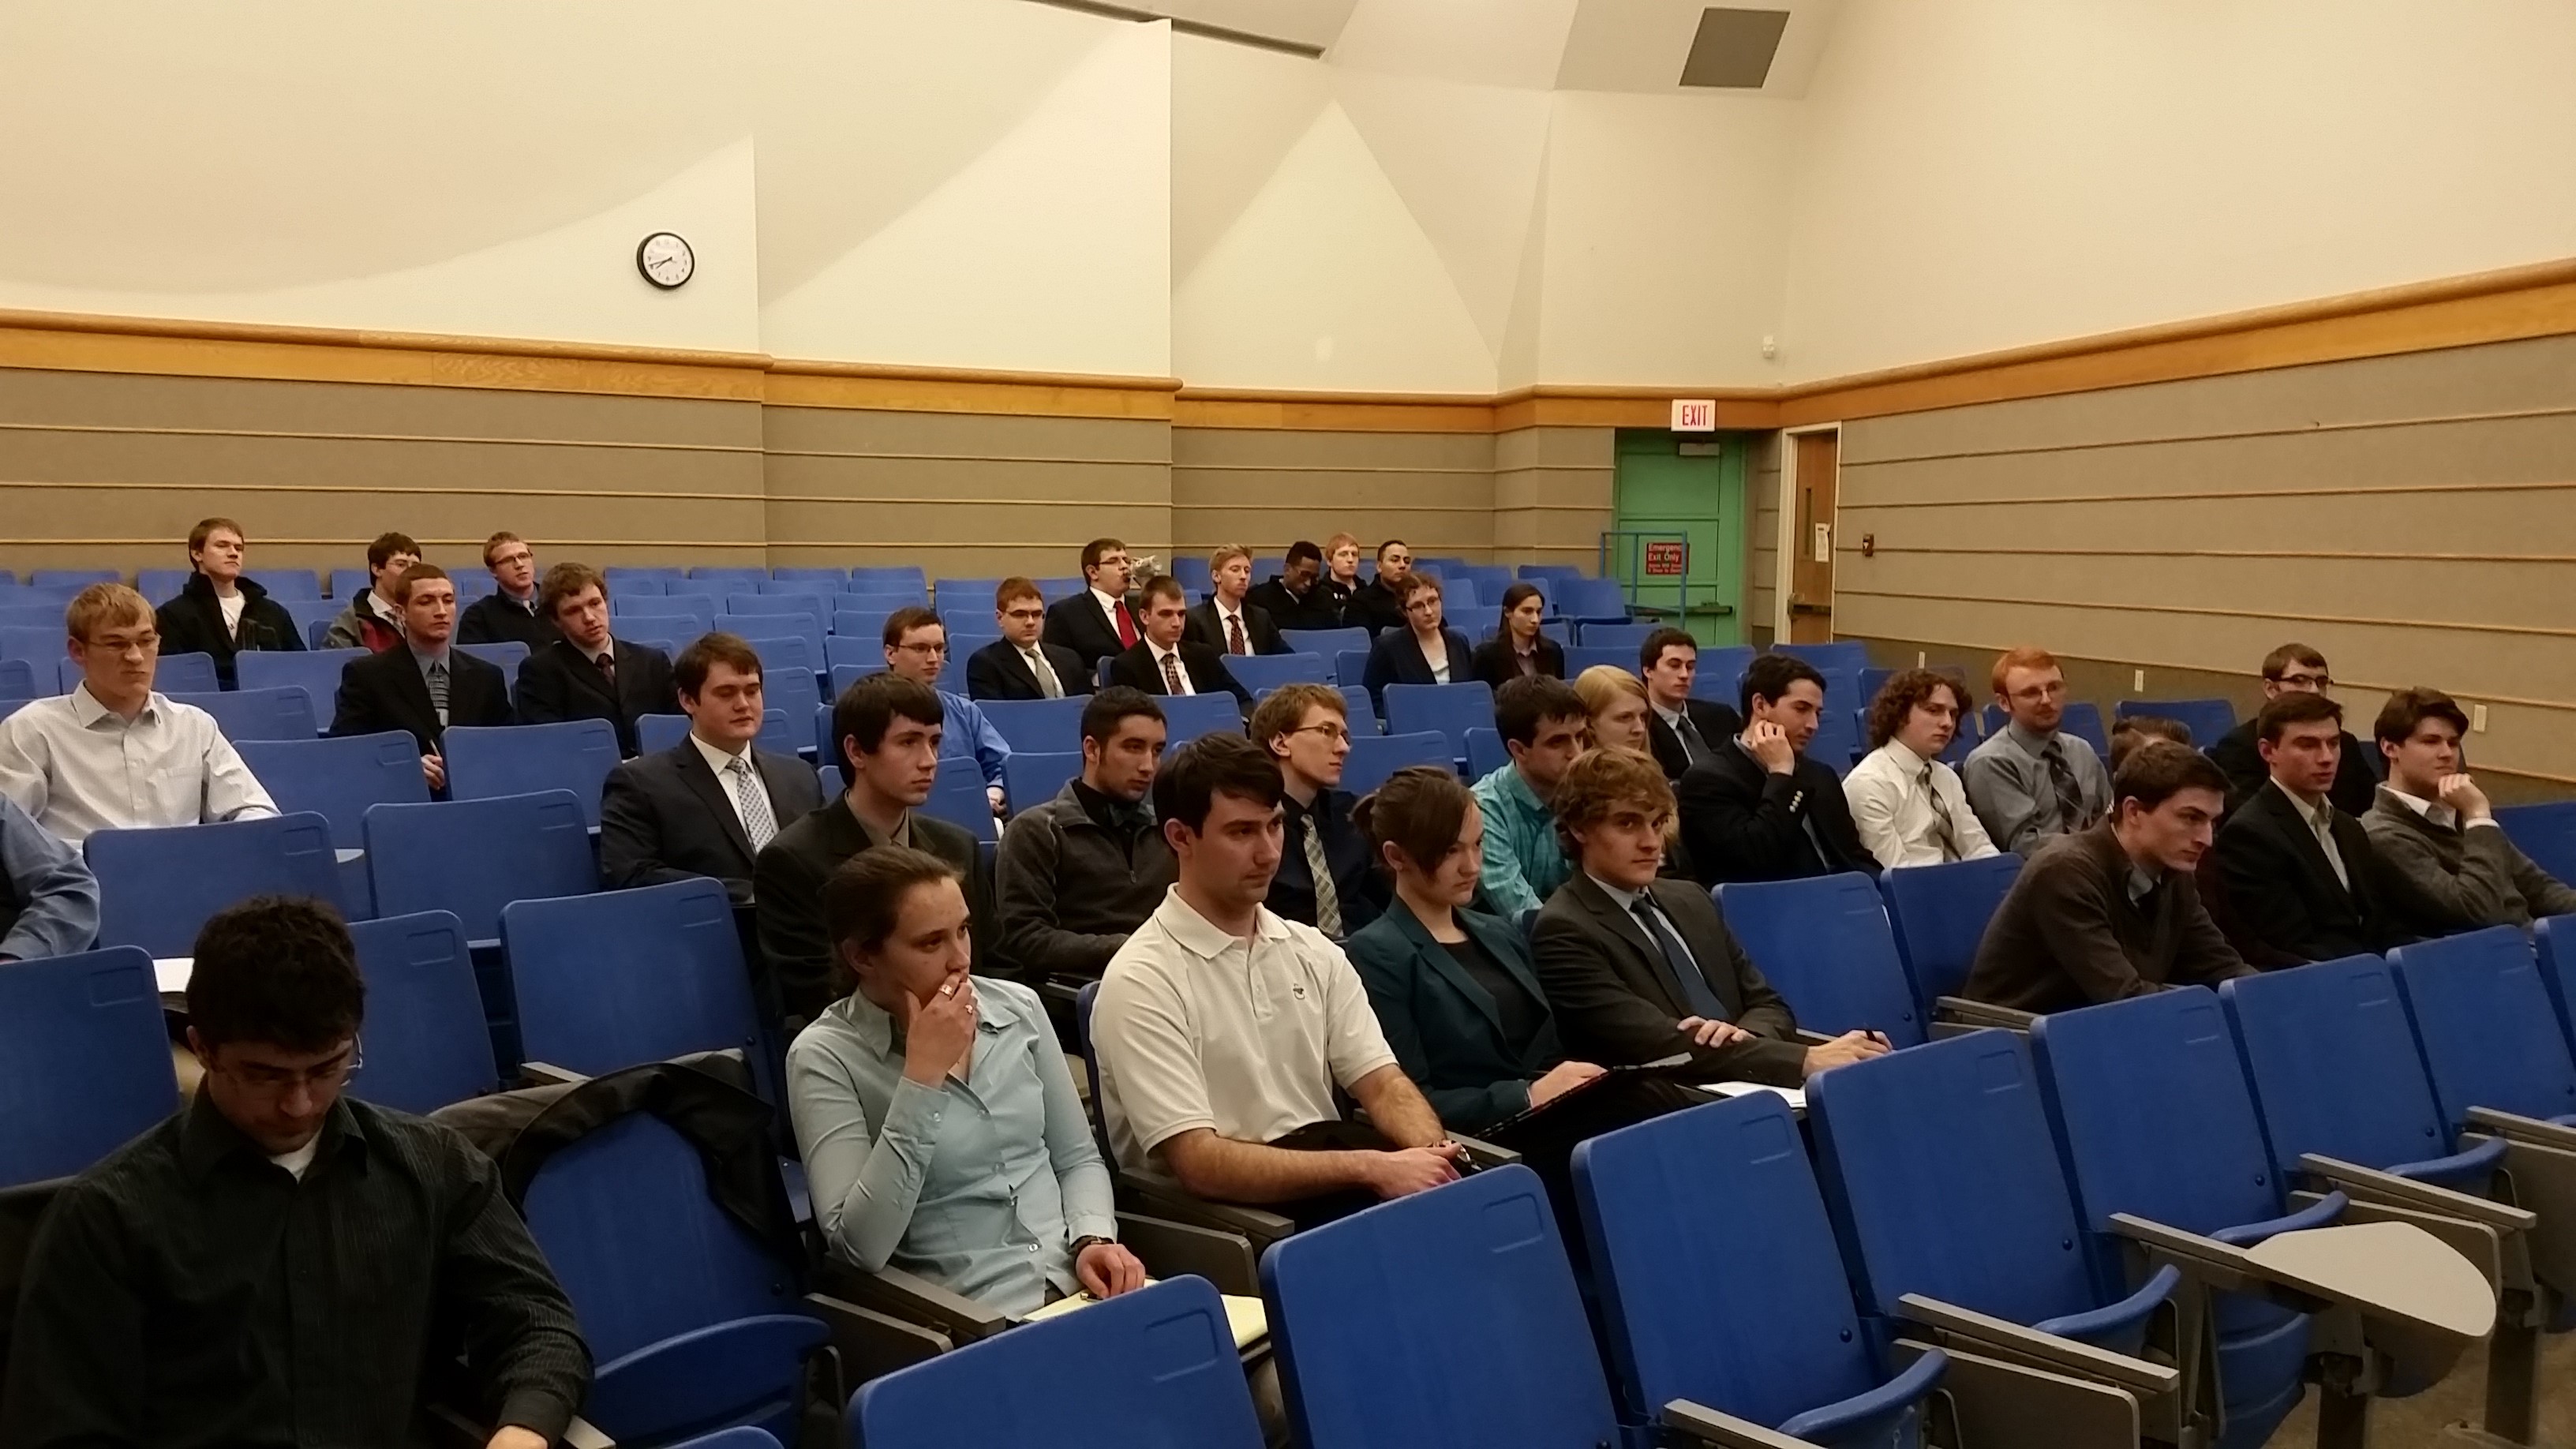 Students Attending Employer Panel Hosted by AIAA Clarkson Chapter